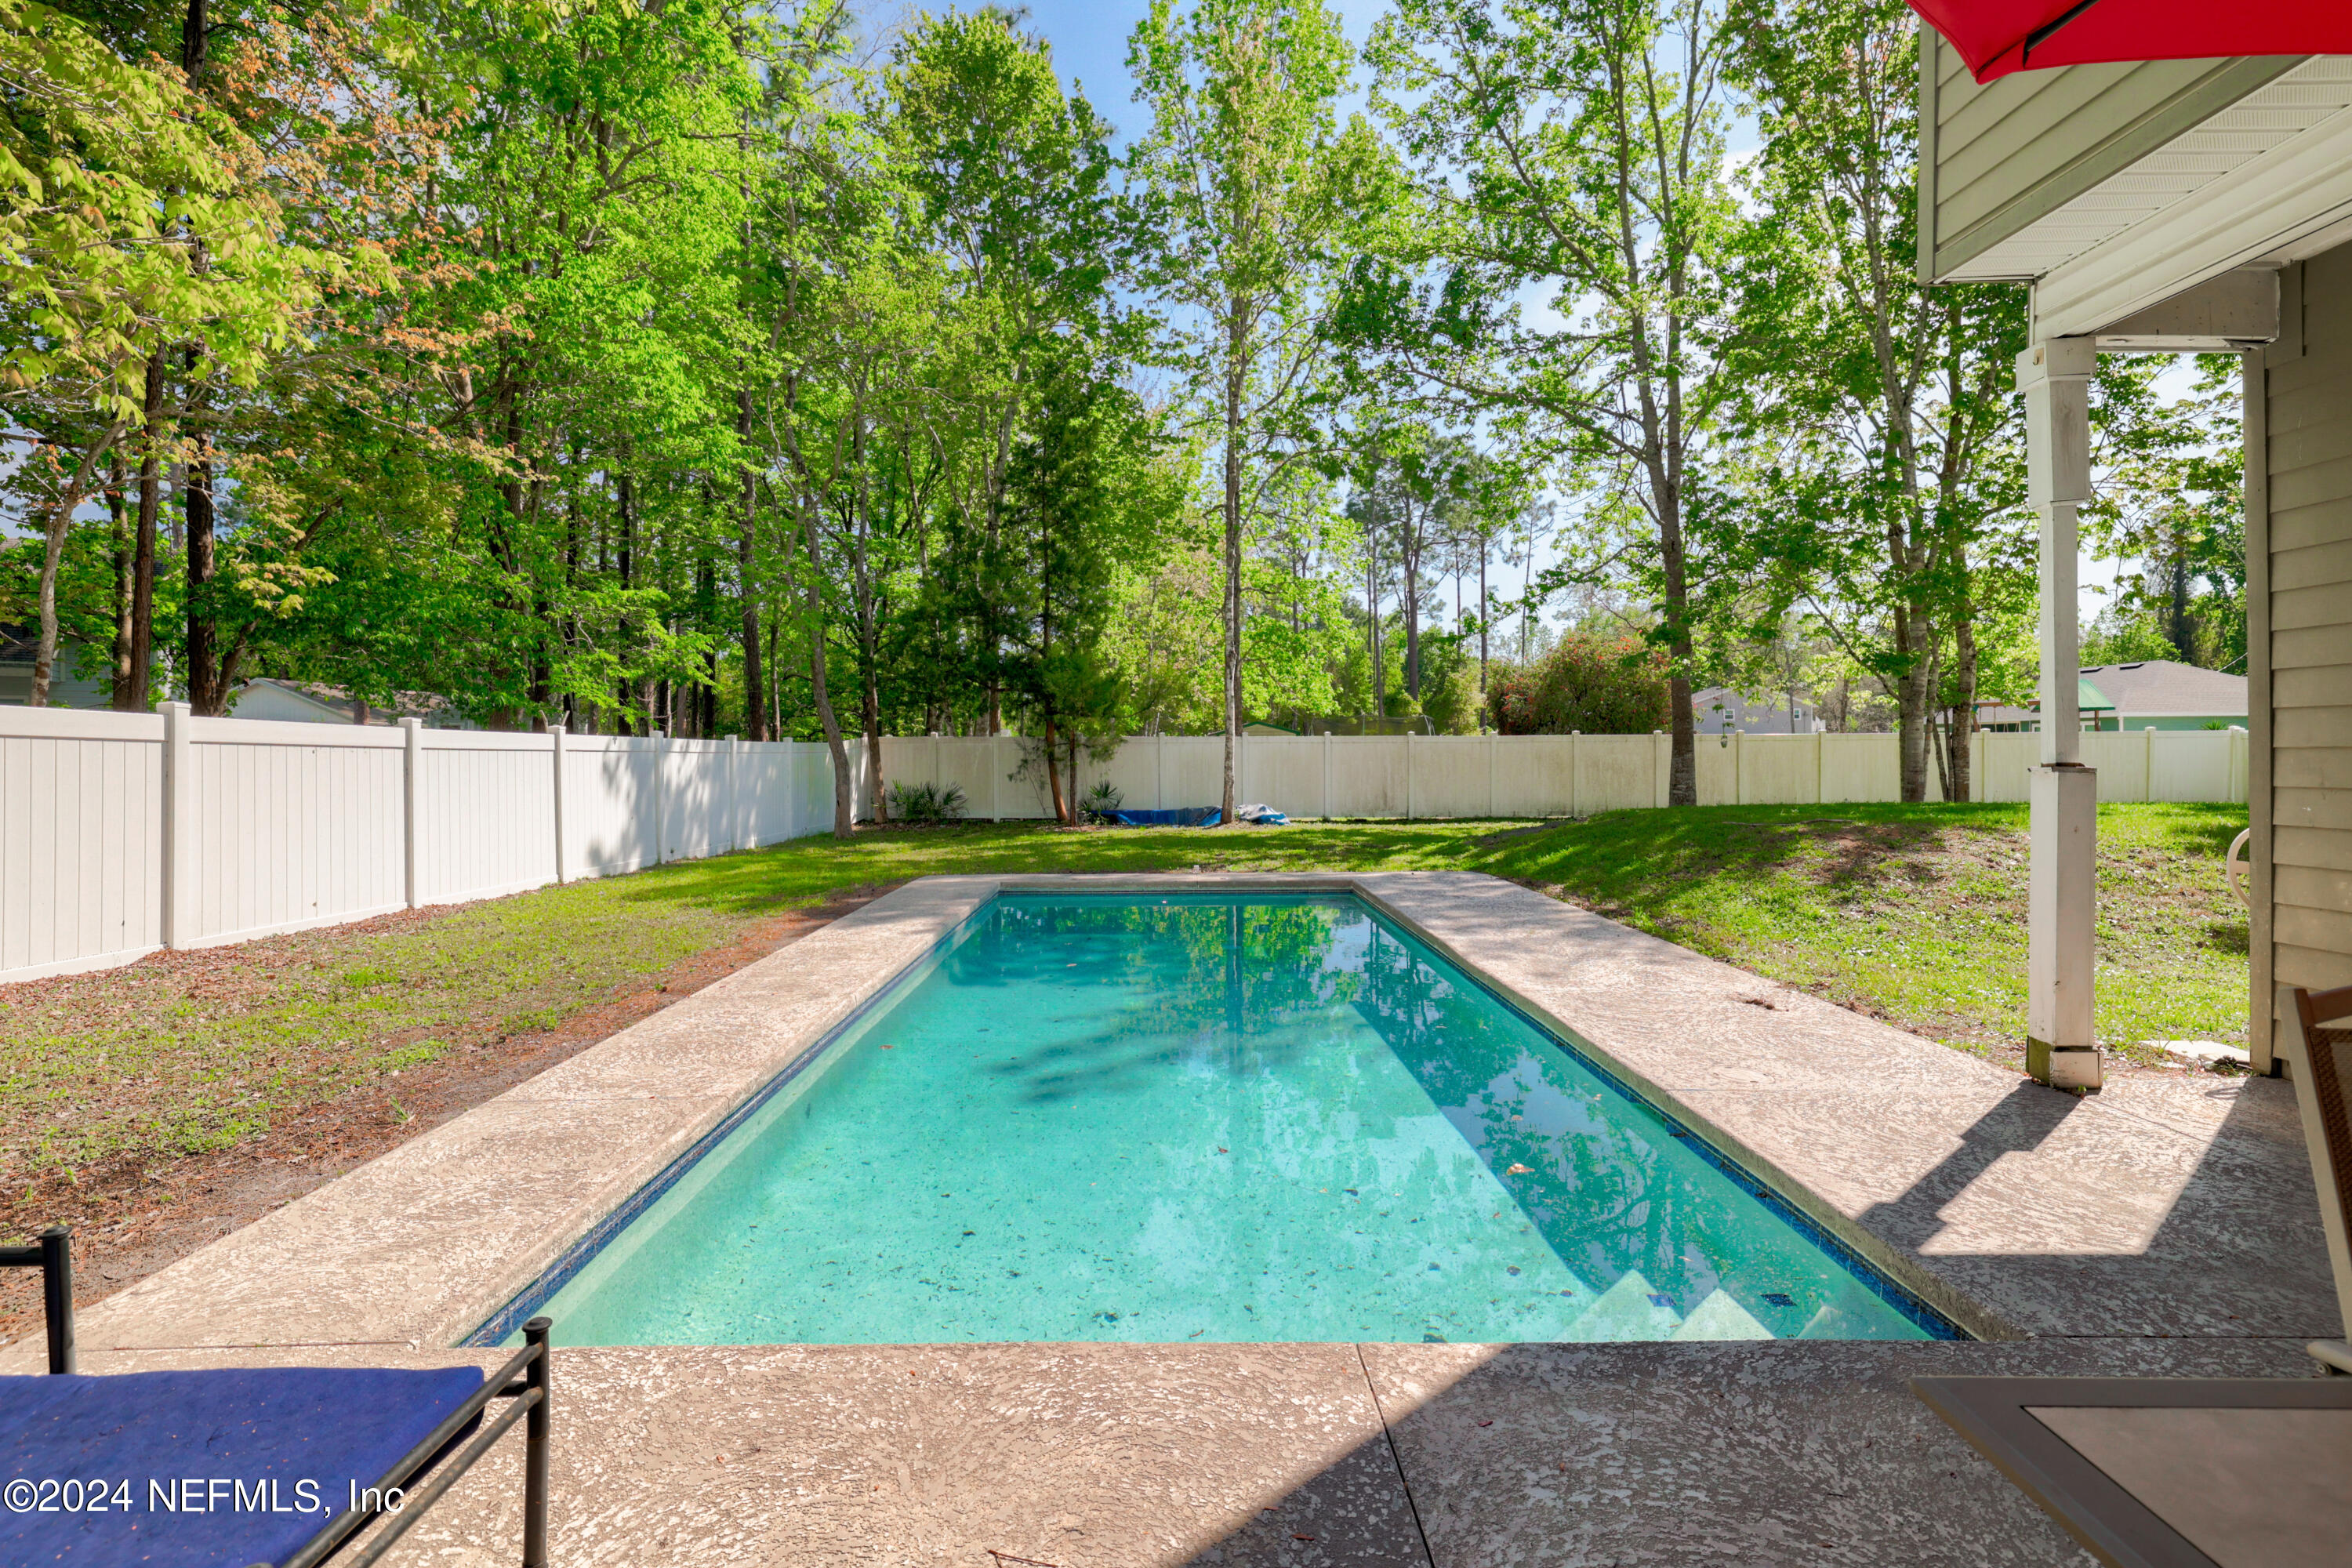 a view of backyard with swimming pool and seating space